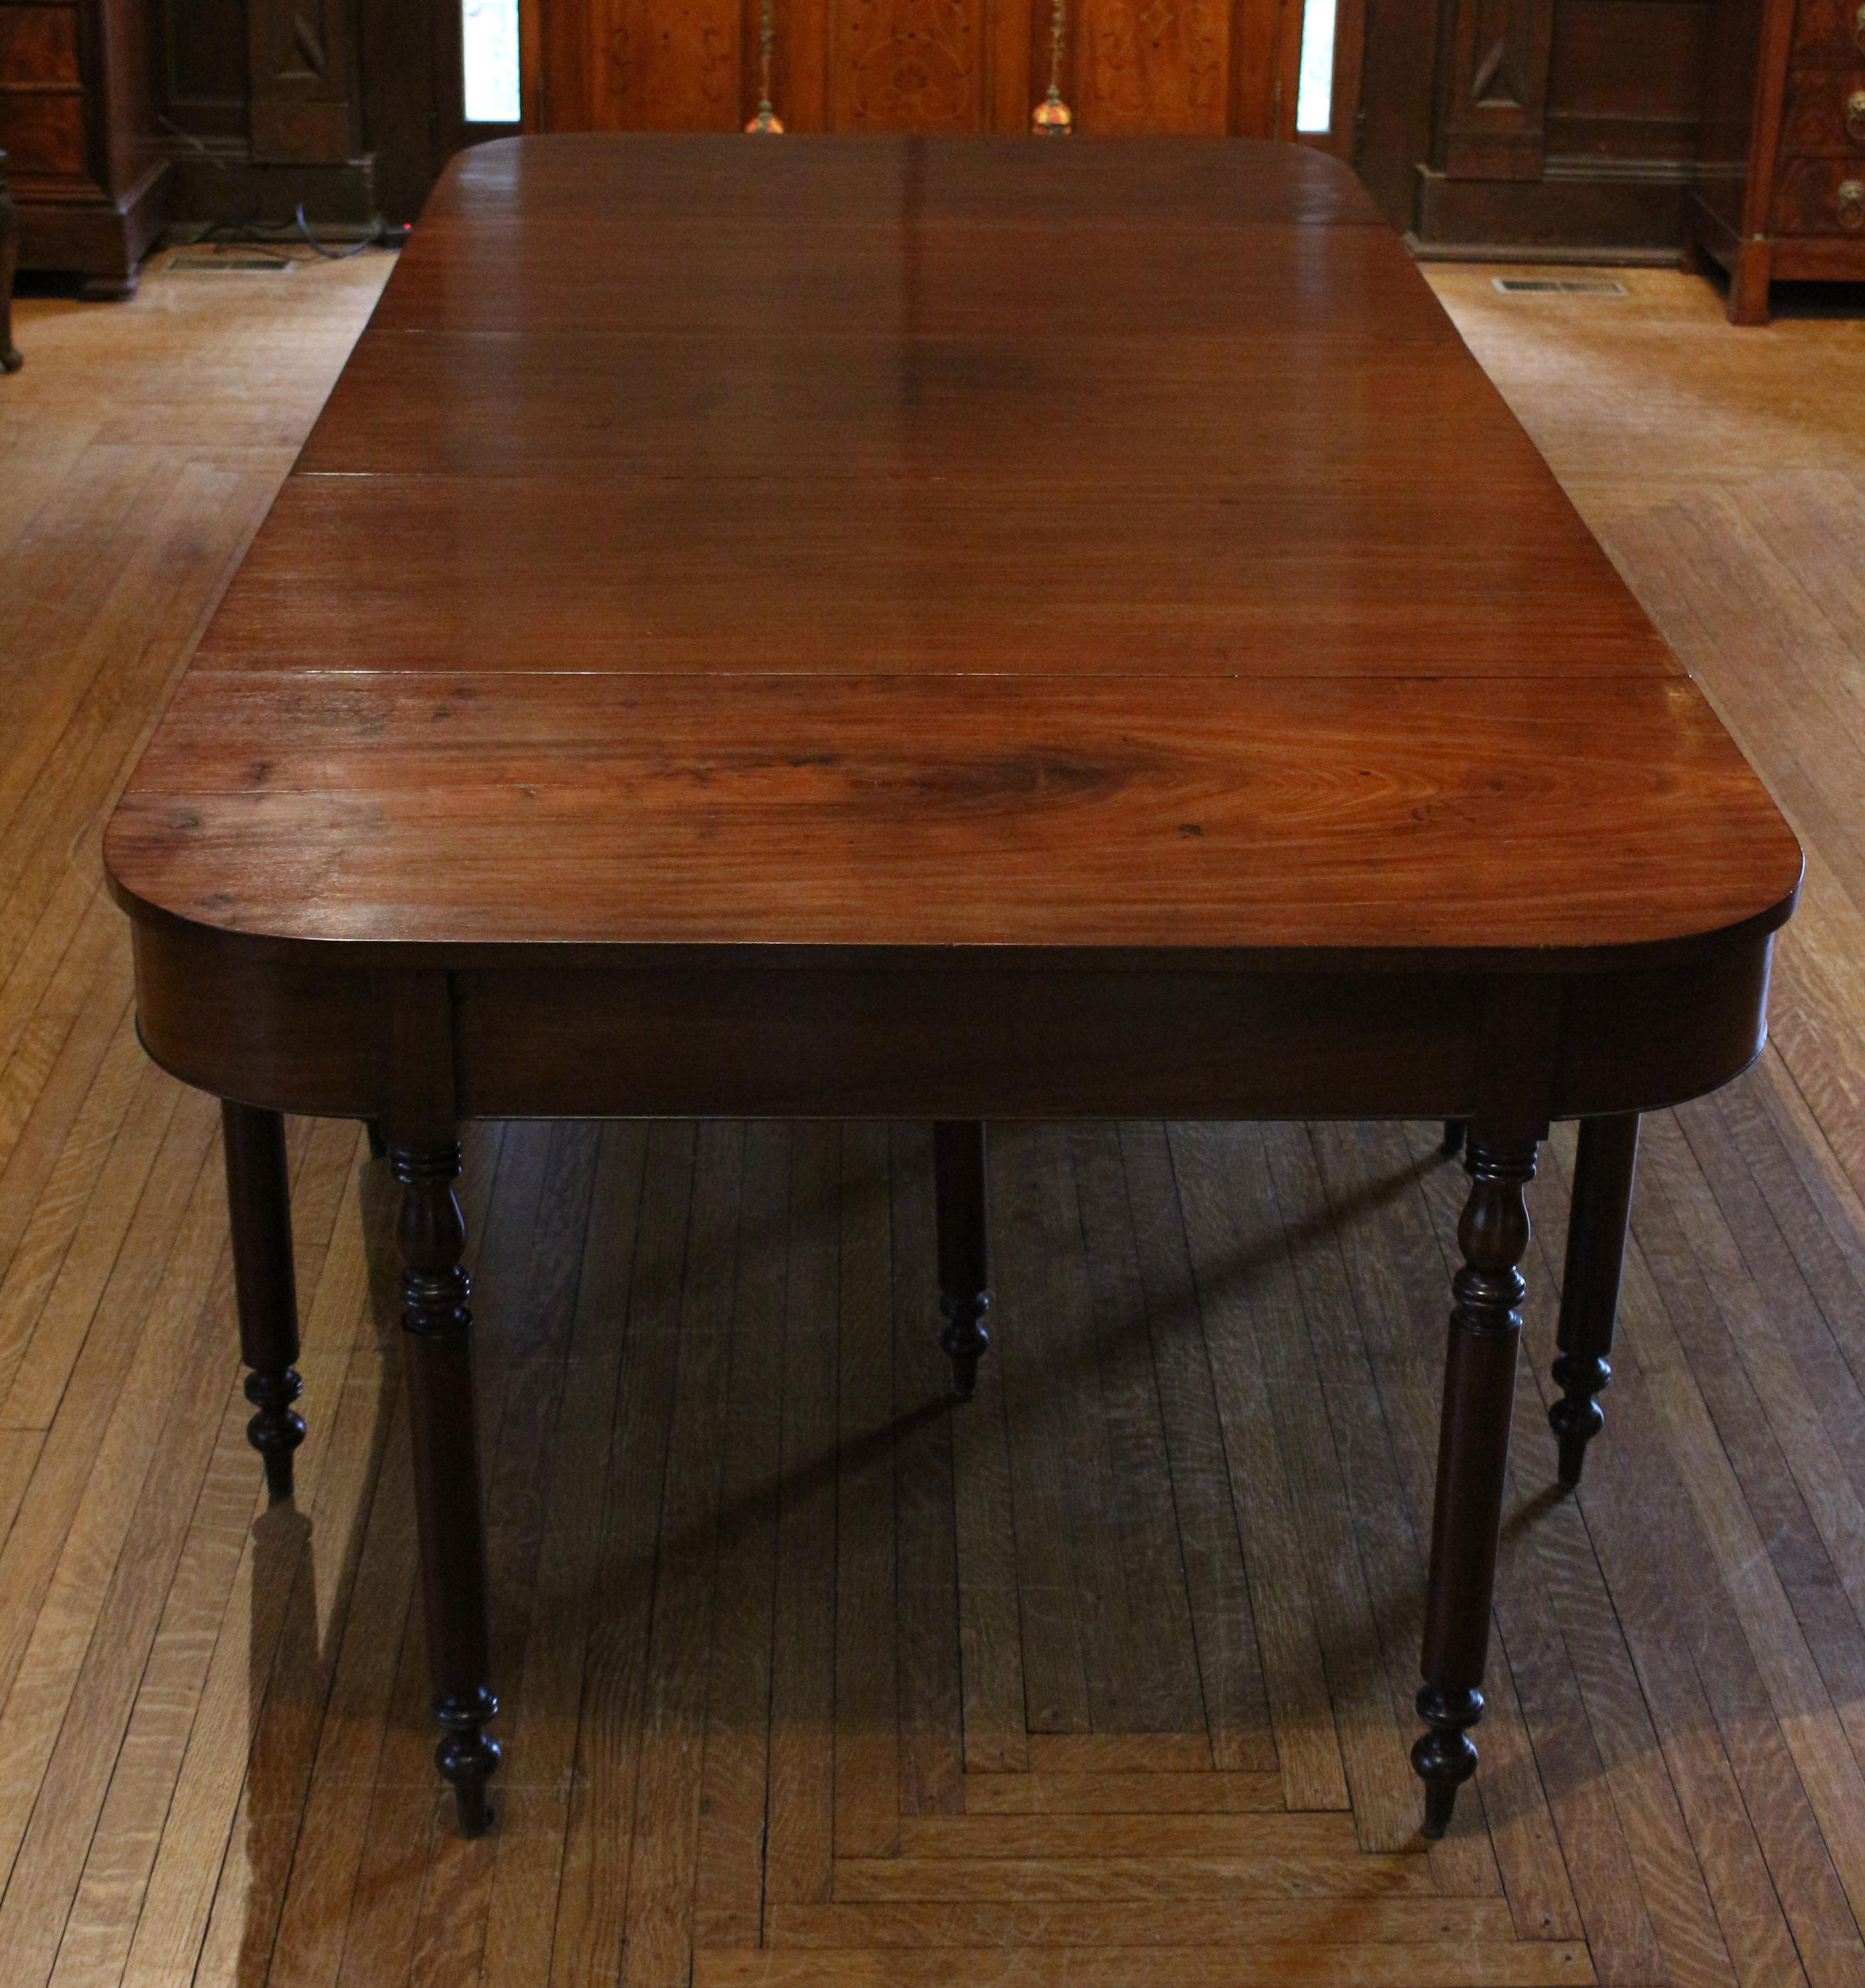 Circa 1830 North Carolina console end banquet table. Two d-ends with drop-side center section - can be used as two console tables and drop-side table or together as a banquet table (clips hold the ends to the center drop end section). Made of walnut